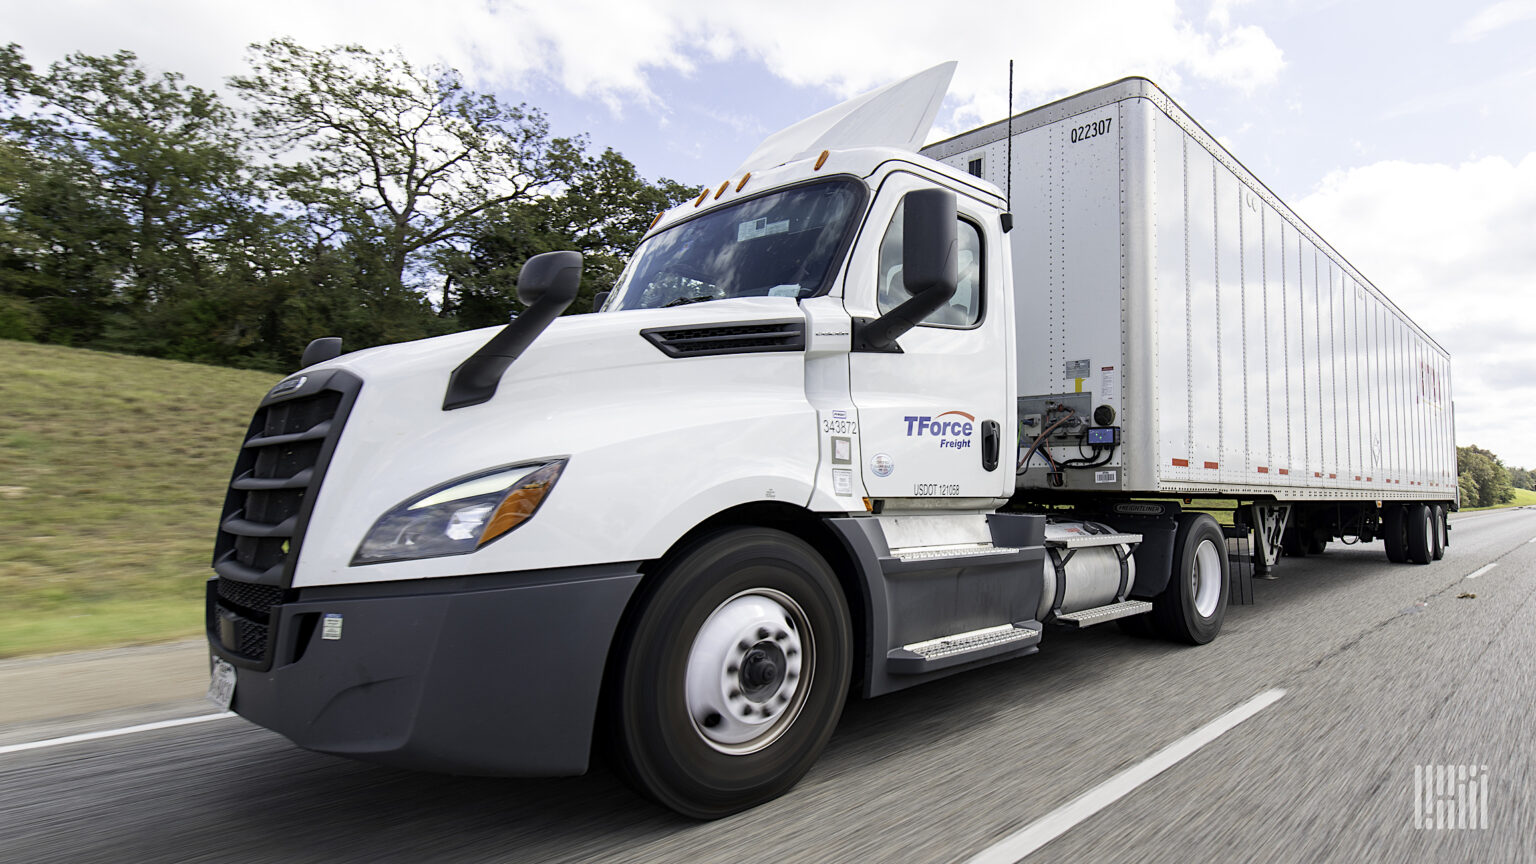 TForce Freight drivers win small victory in truck speed fight